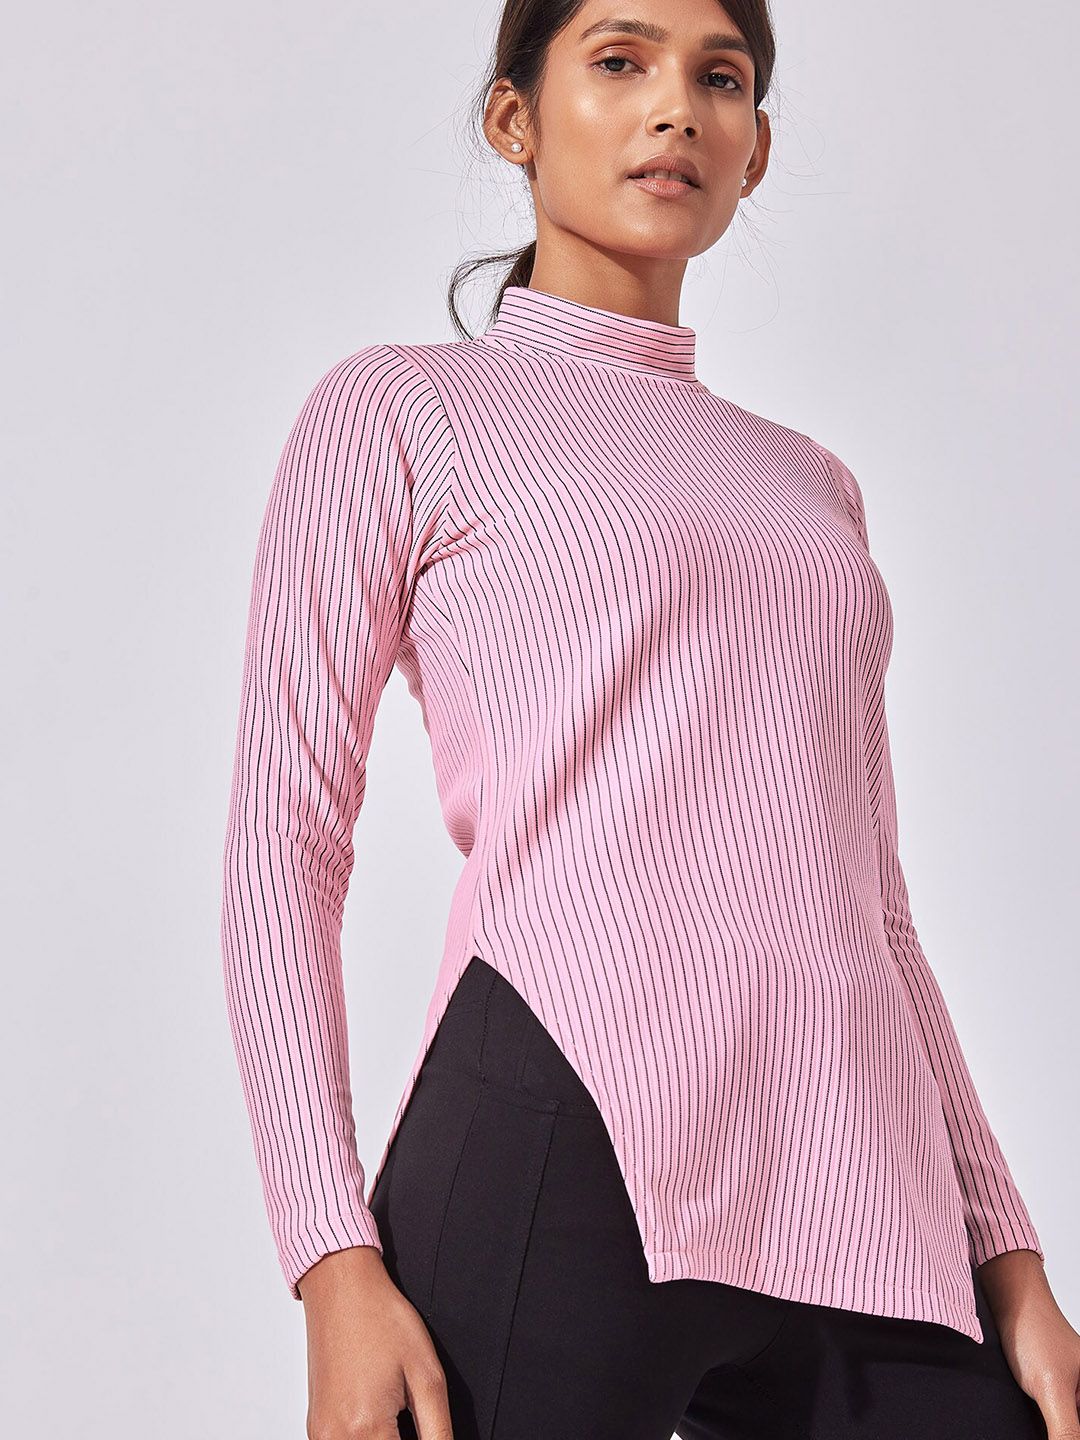 The Label Life Pink Striped High Neck Top Price in India